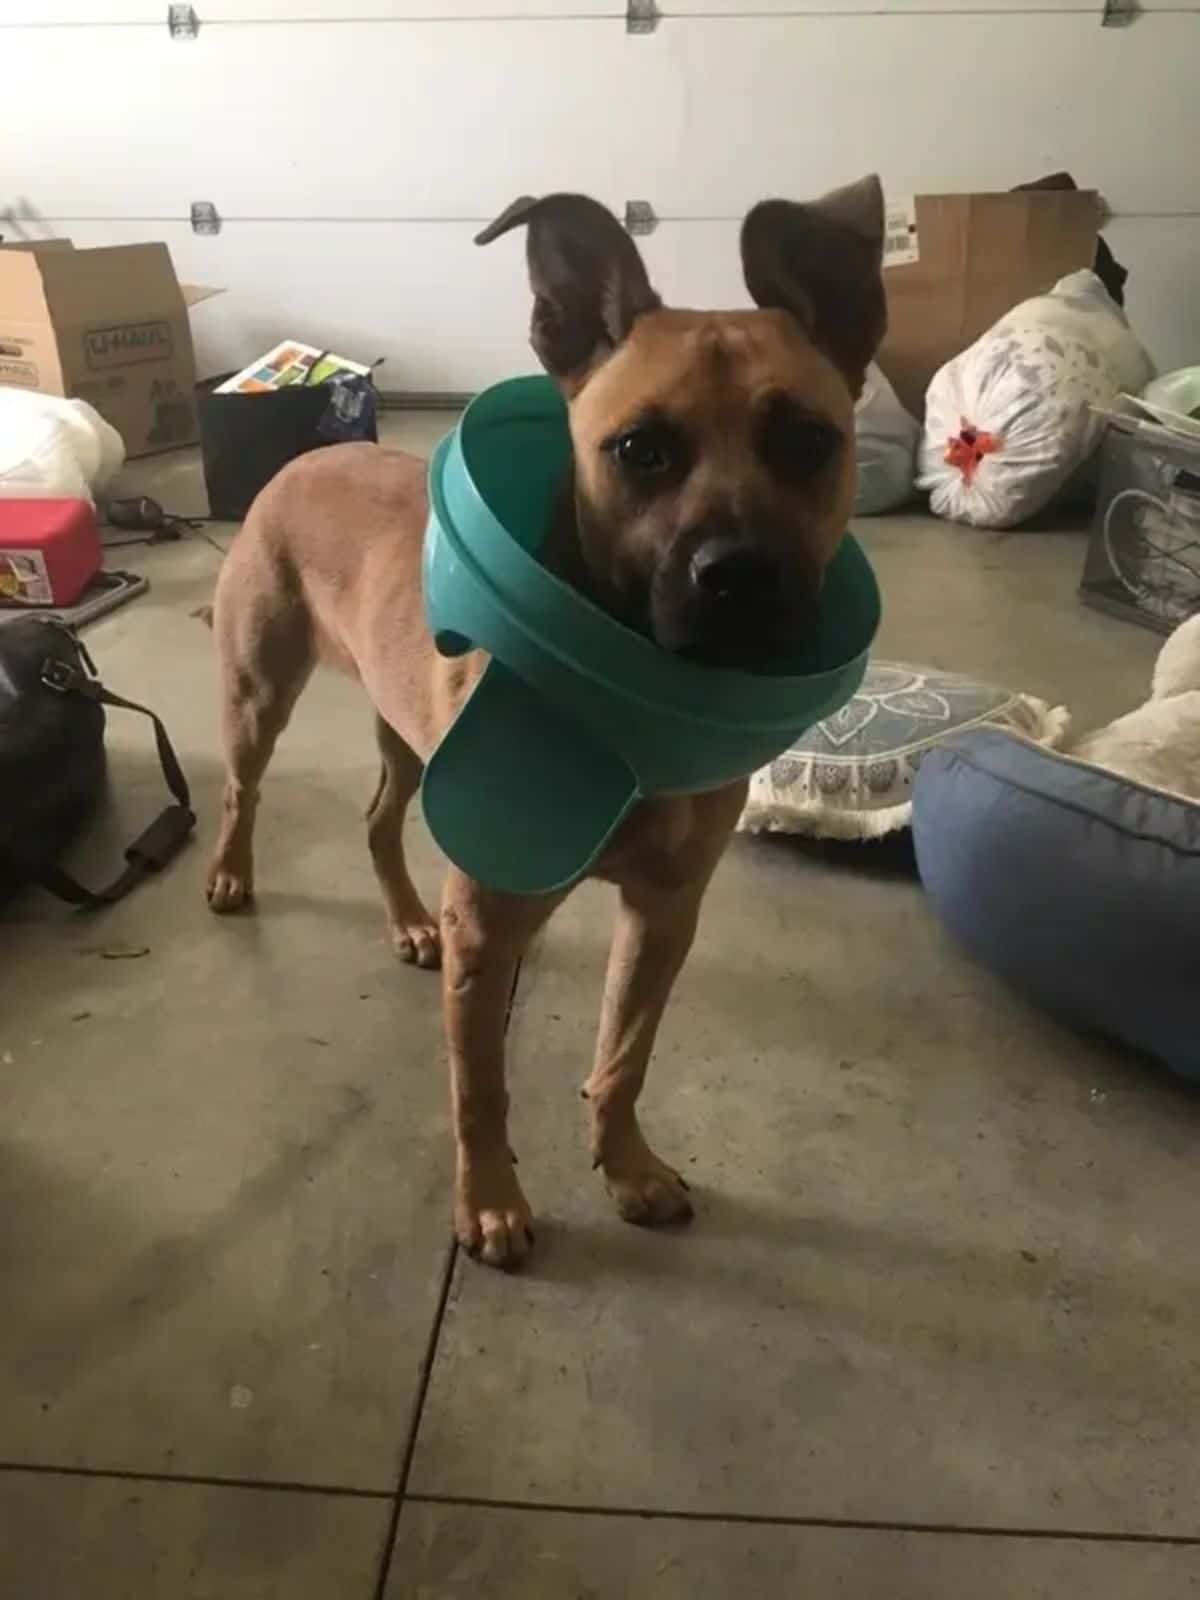 brown dog standing on floor with the green top of a trash can upside down around its neck